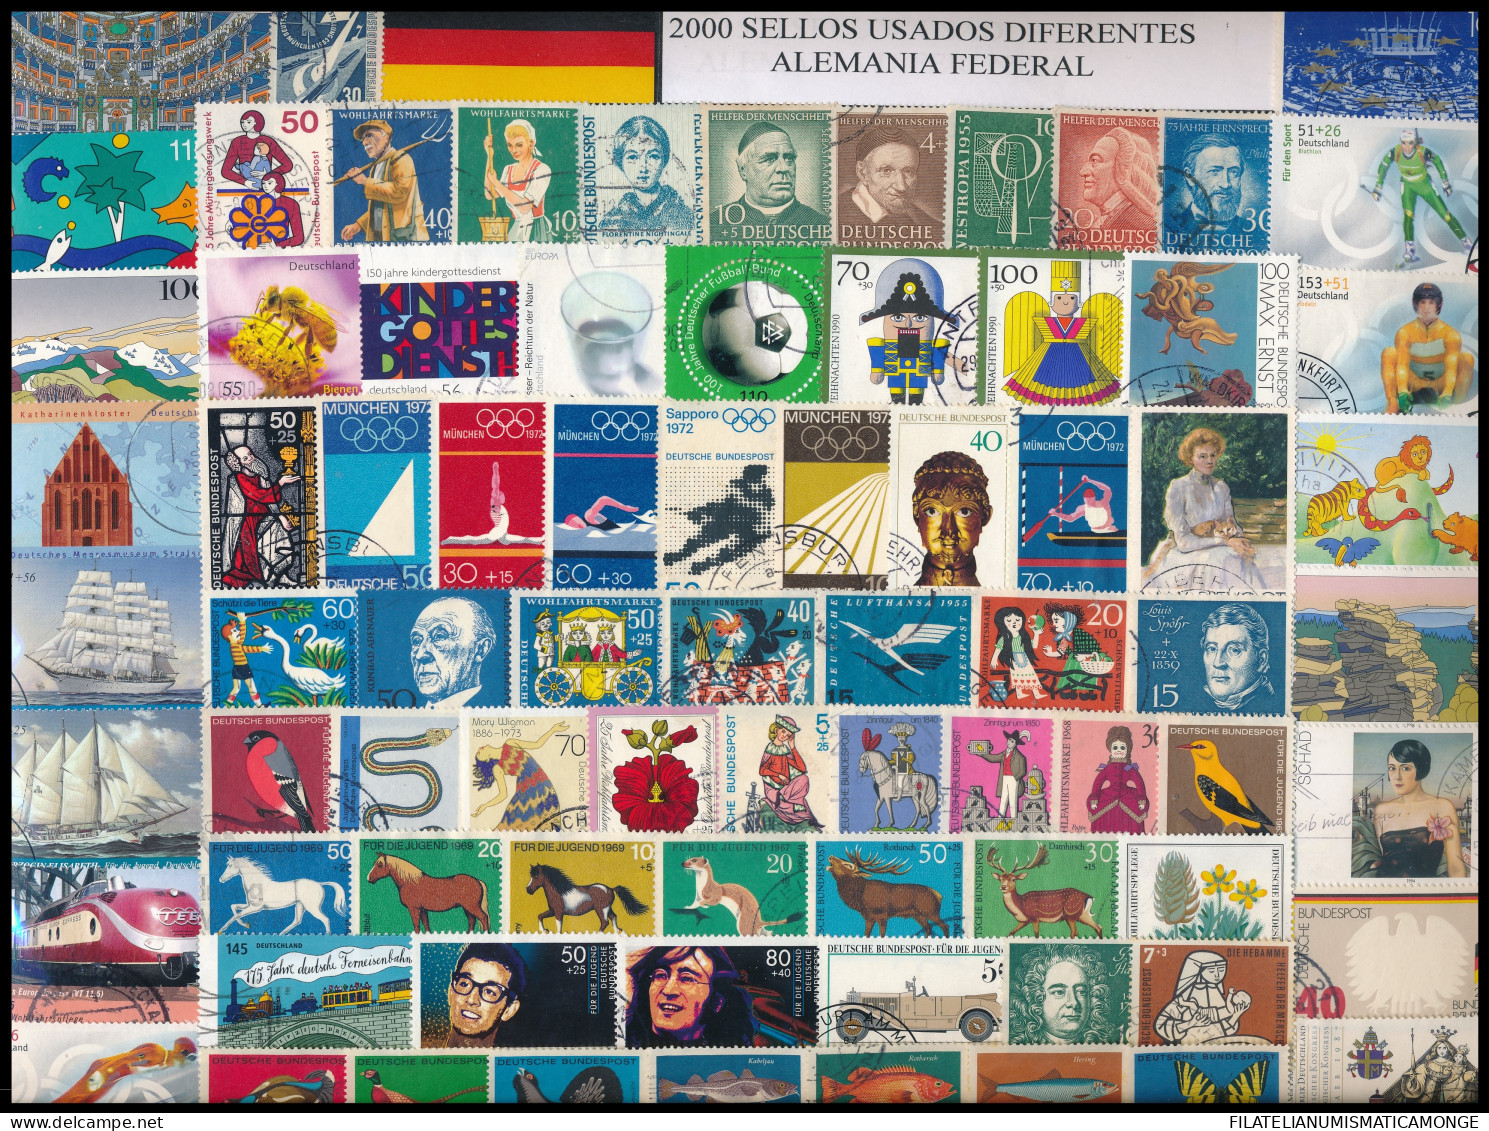  Offer - Lot Stamps - Paqueteria  Alemania / Federal 2000 Sellos Diferentes Ele - Lots & Kiloware (mixtures) - Min. 1000 Stamps